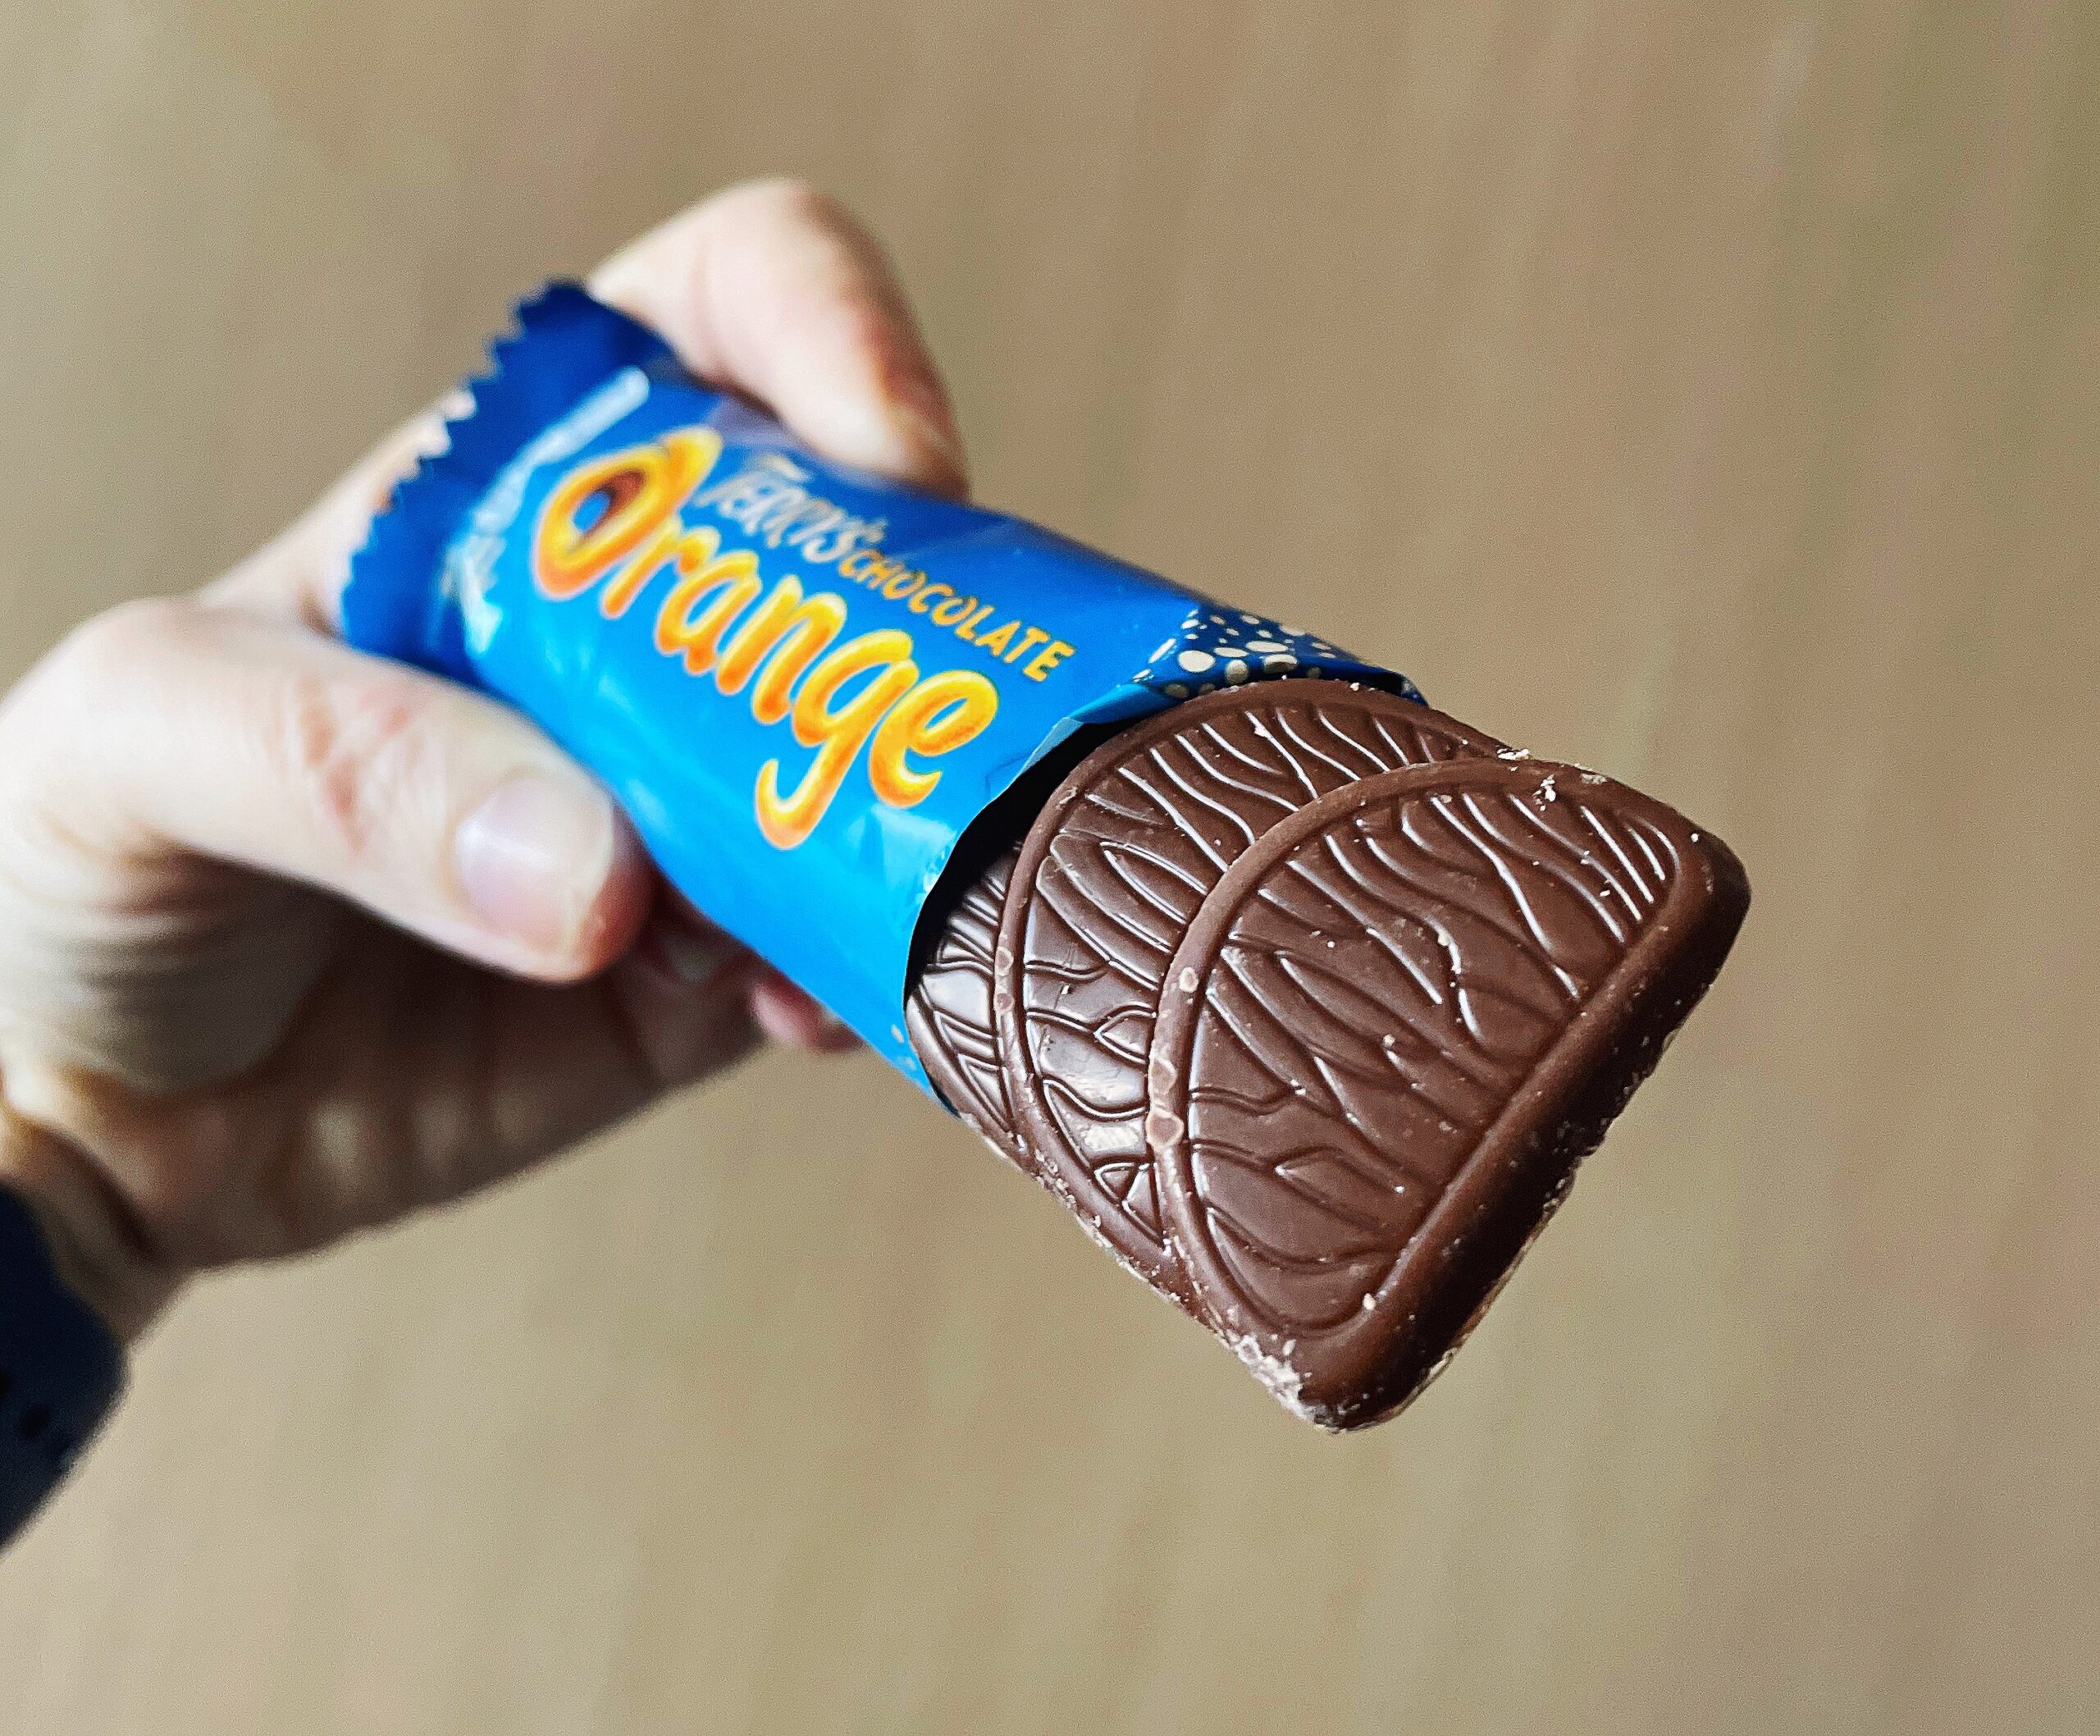 Terry's Chocolate Orange Bar Opened showing the shape of the candy bar